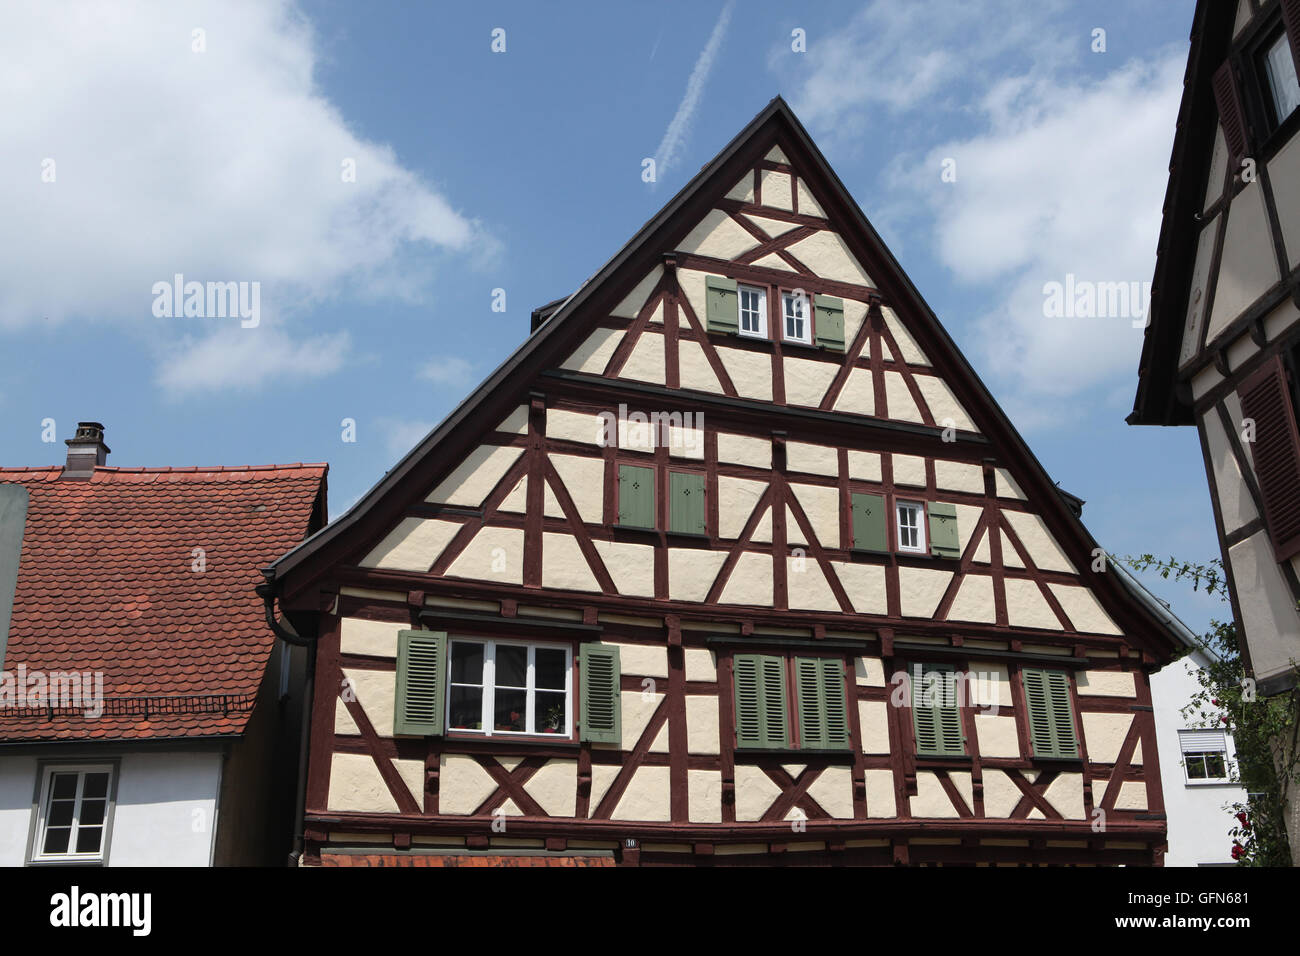 Traditional half-timbered houses in Marbach am Neckar, Baden-Wurttemberg, Germany. Stock Photo